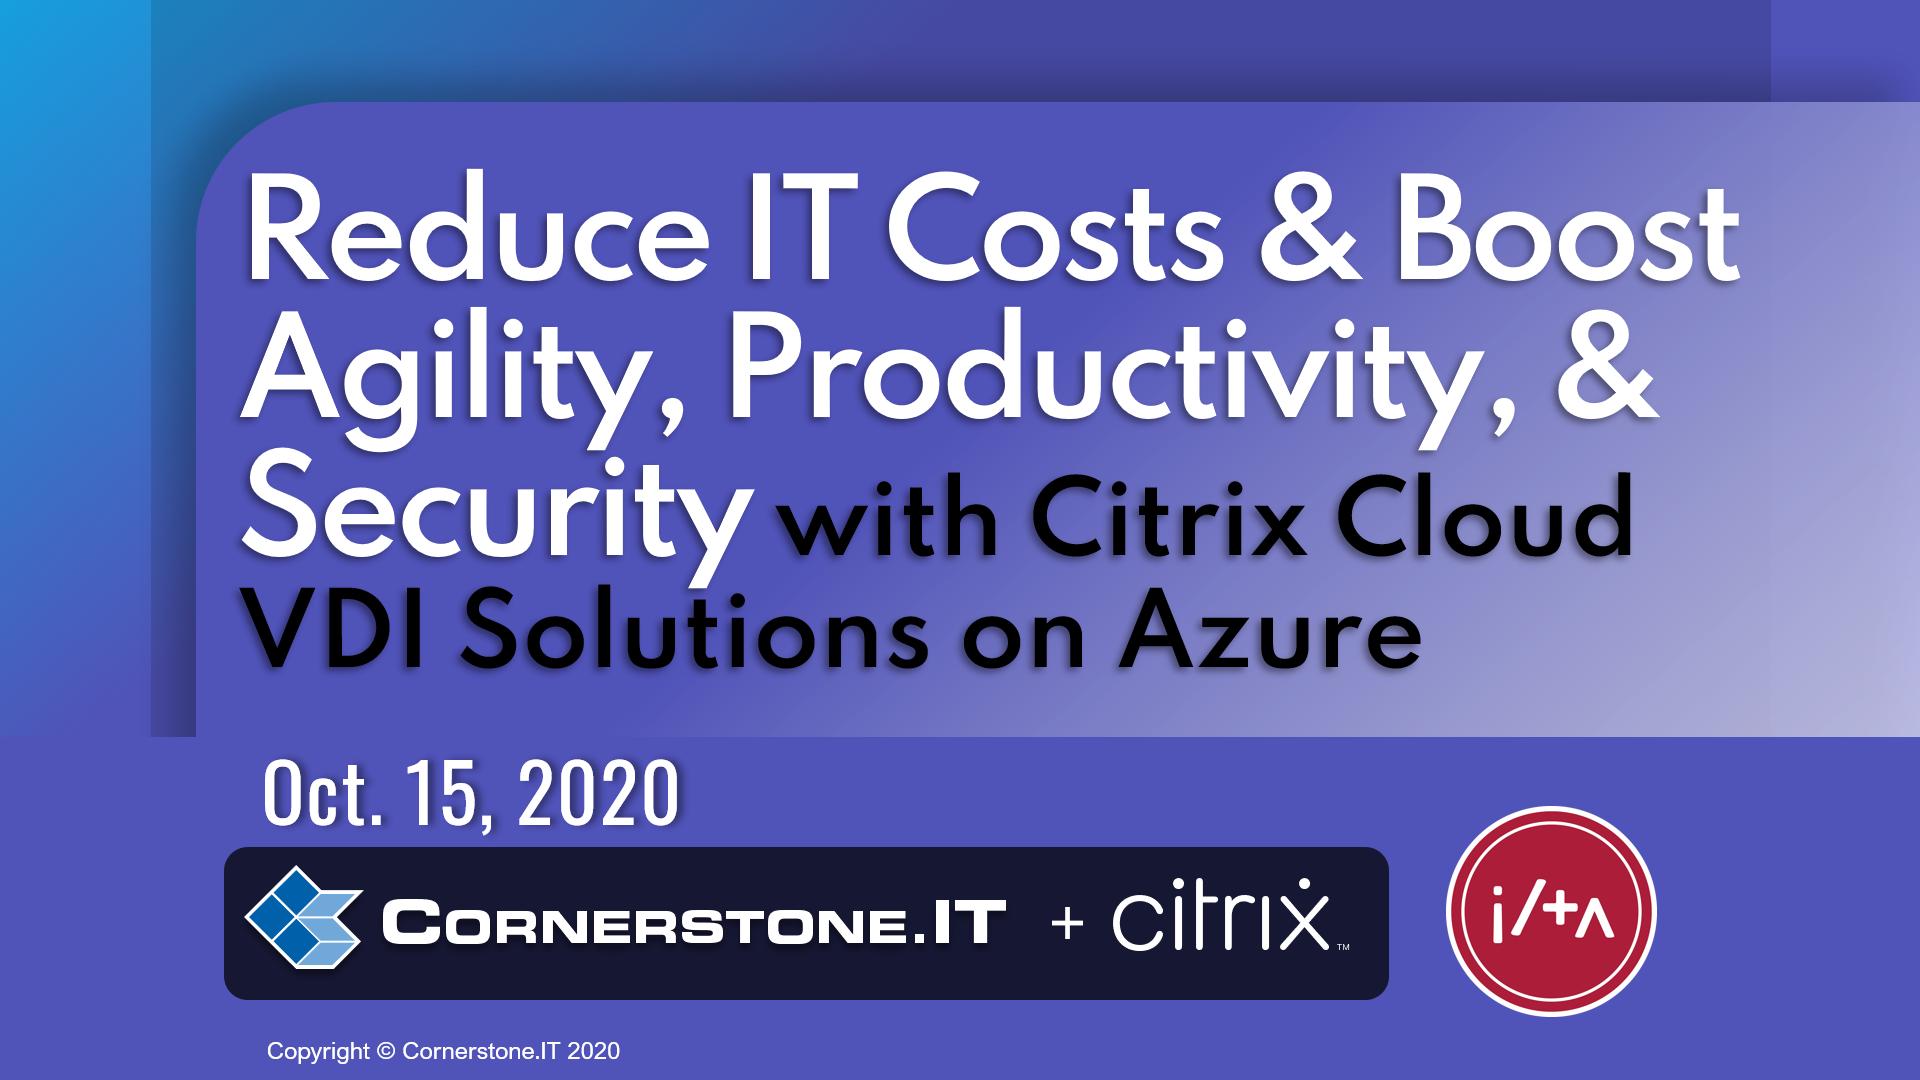 Reduce IT Costs Boost Agility, Productivity, & Security with Citrix Cloud VDI Solutions on MS Azure